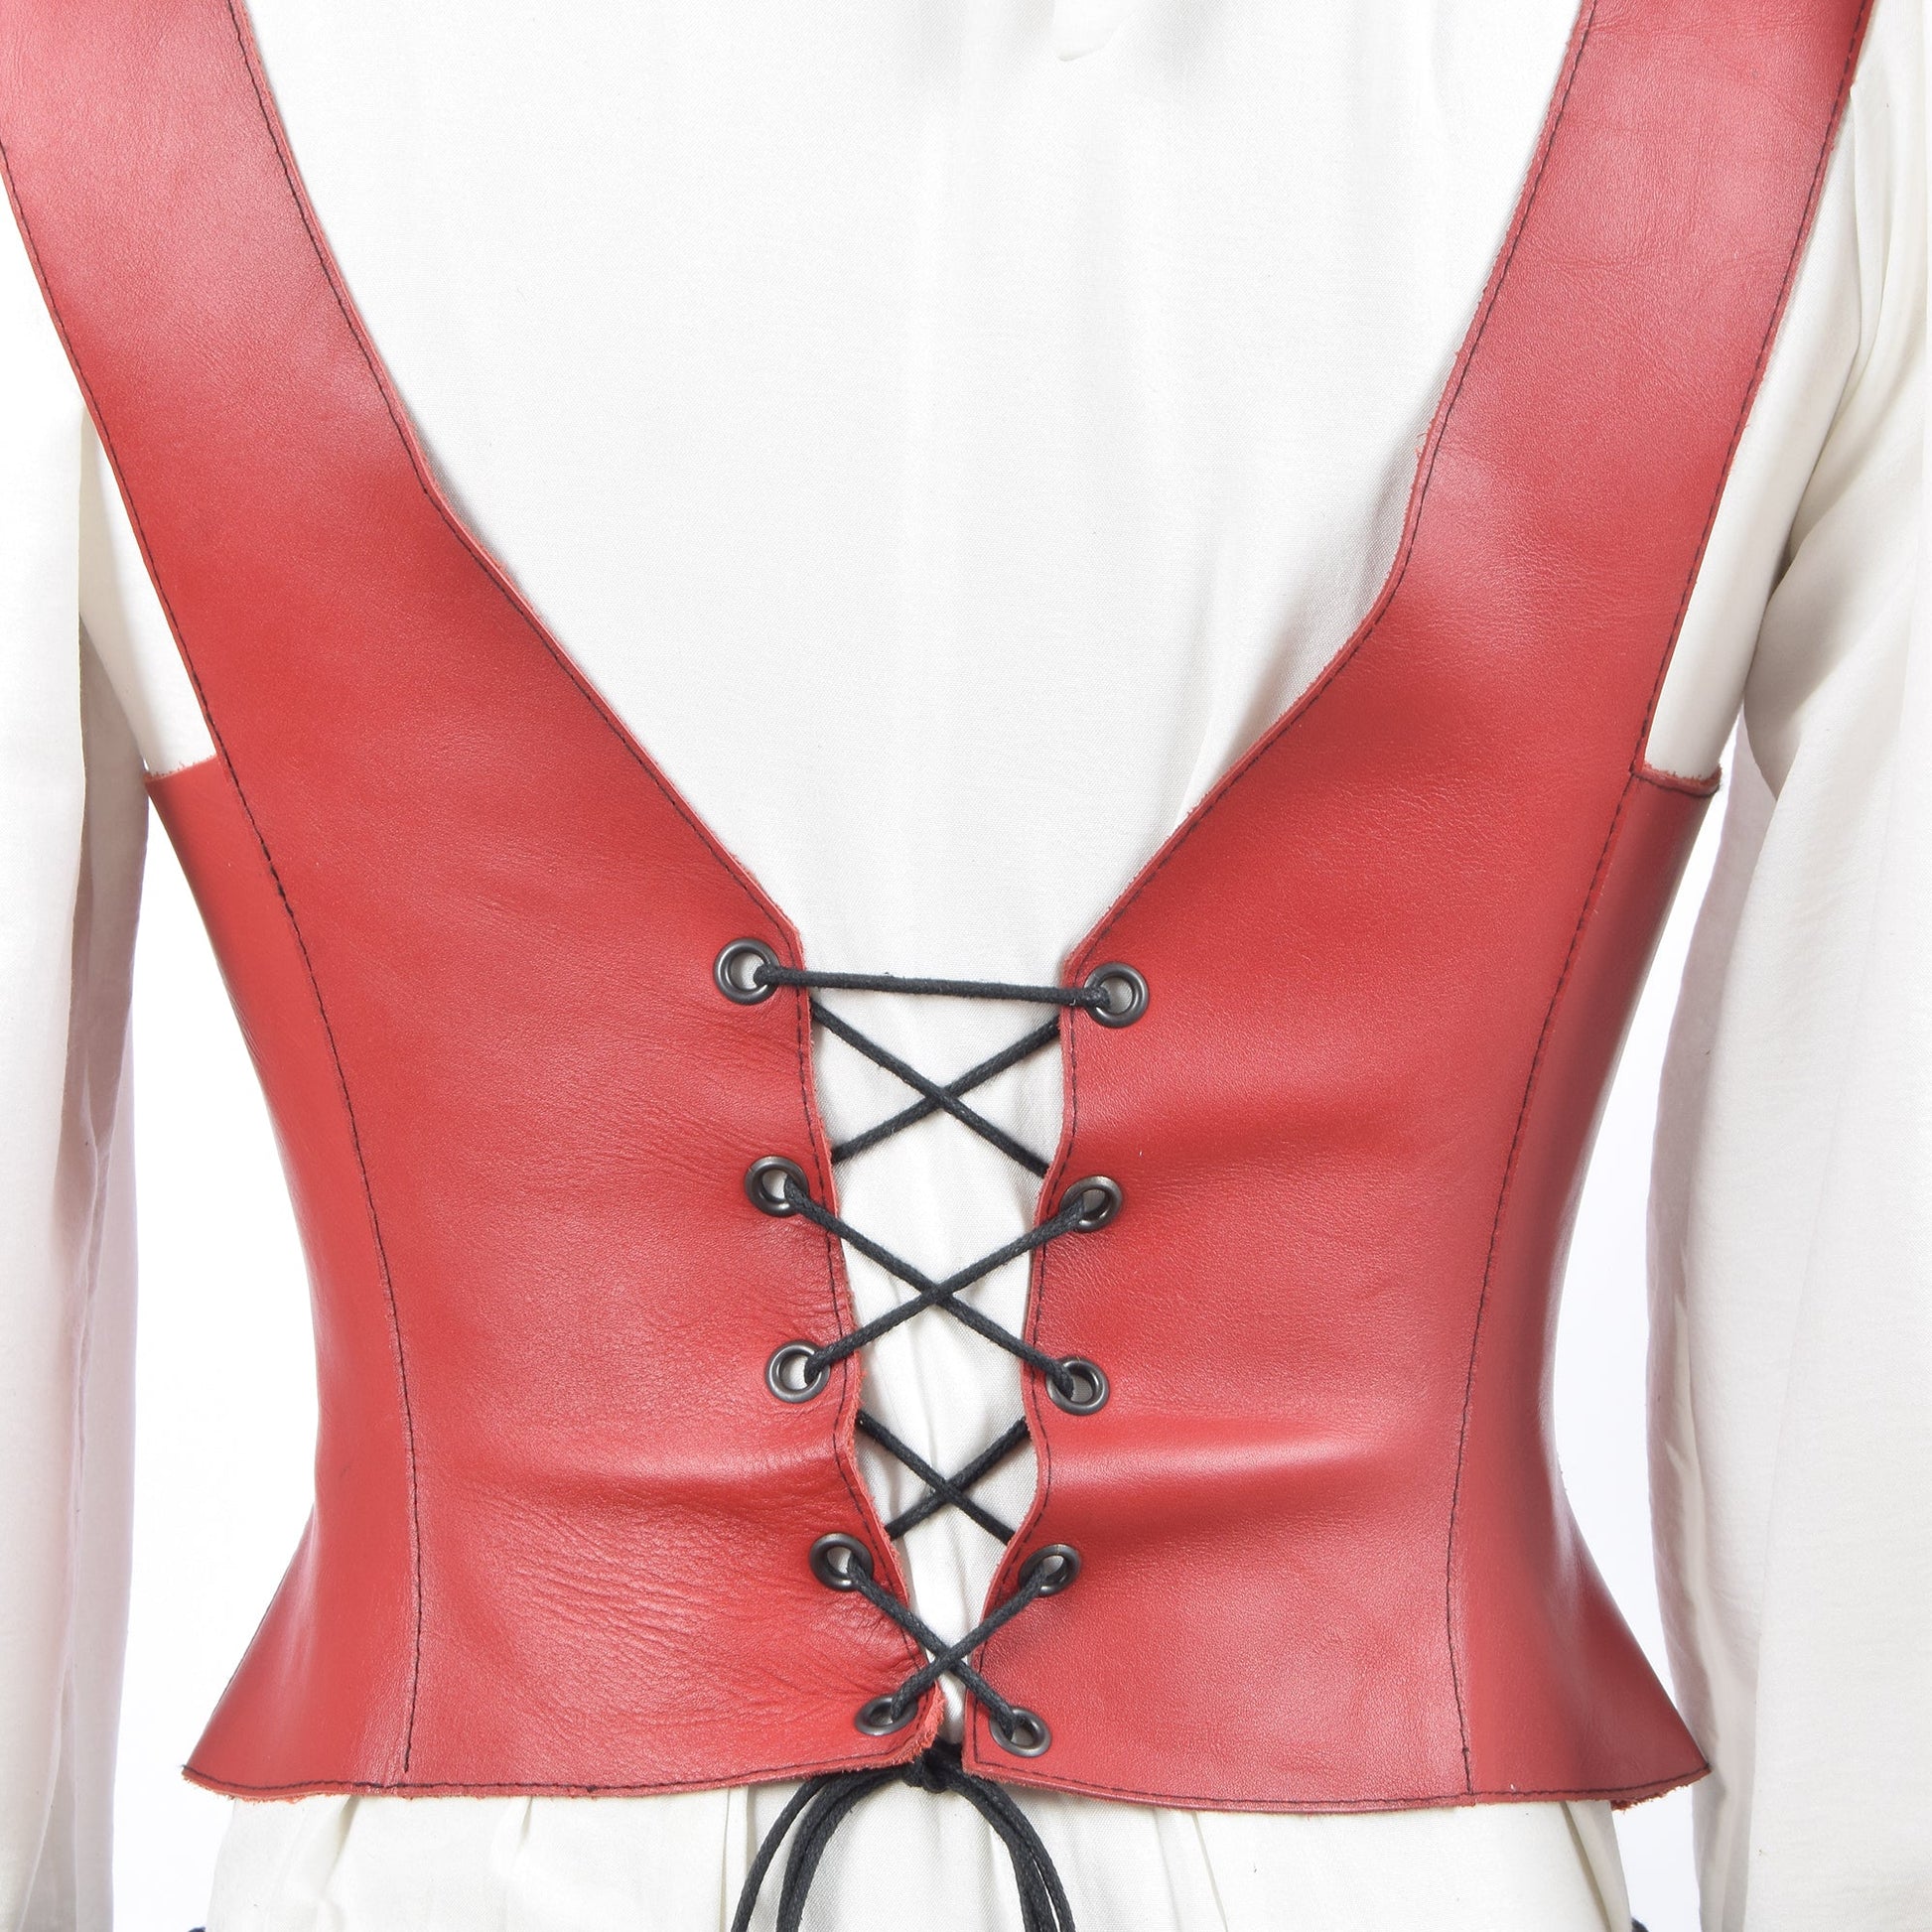 Harmony Leather Bustier Red - Zengoda Shop online from Artisan Brands